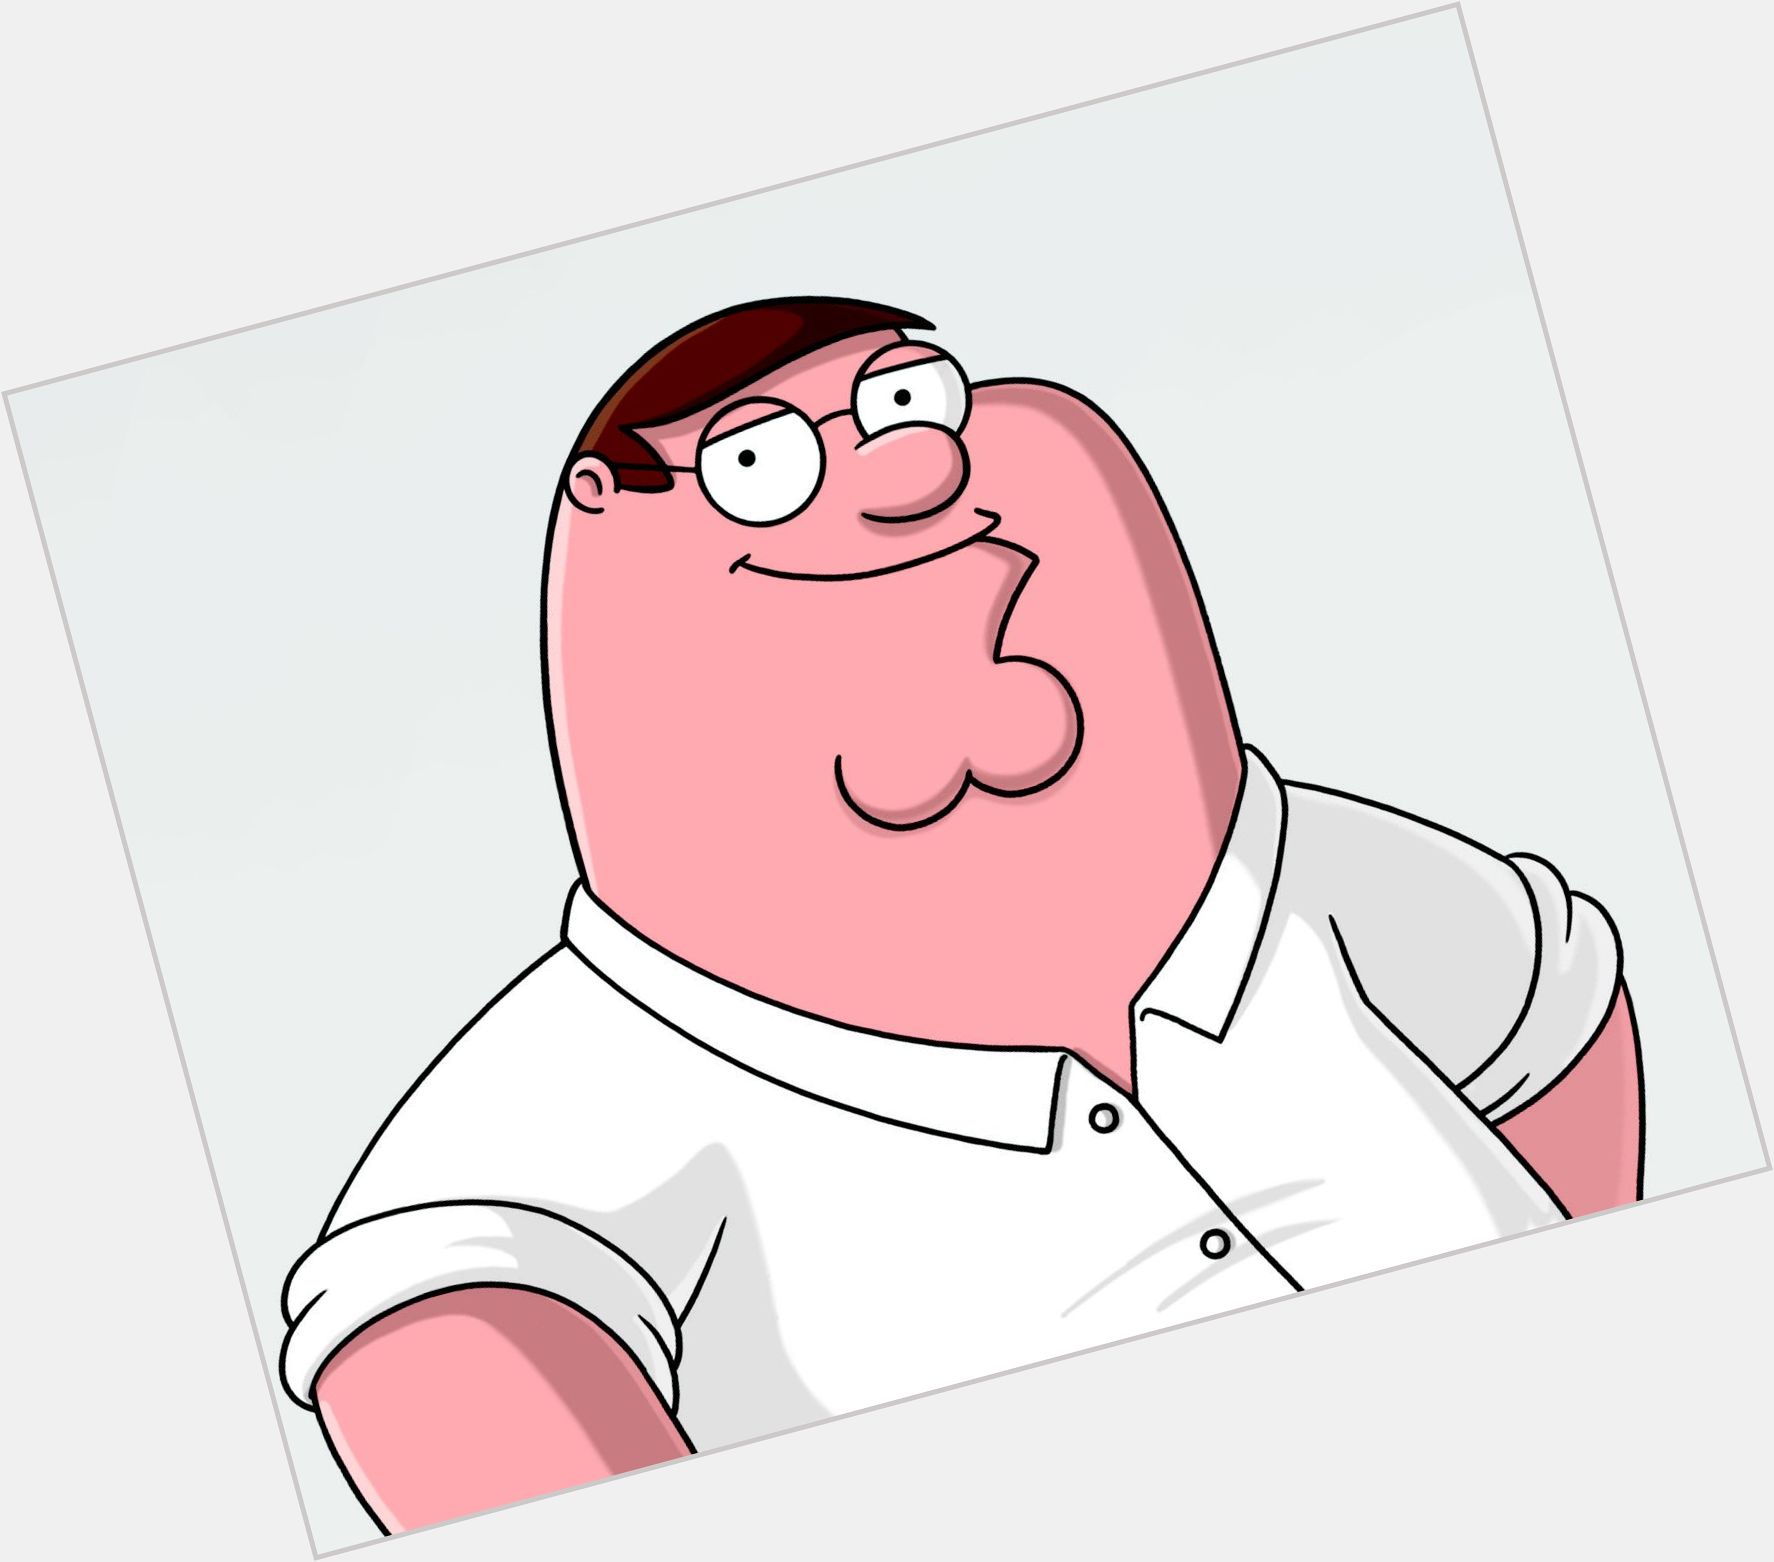 peter griffin real life 1.jpg